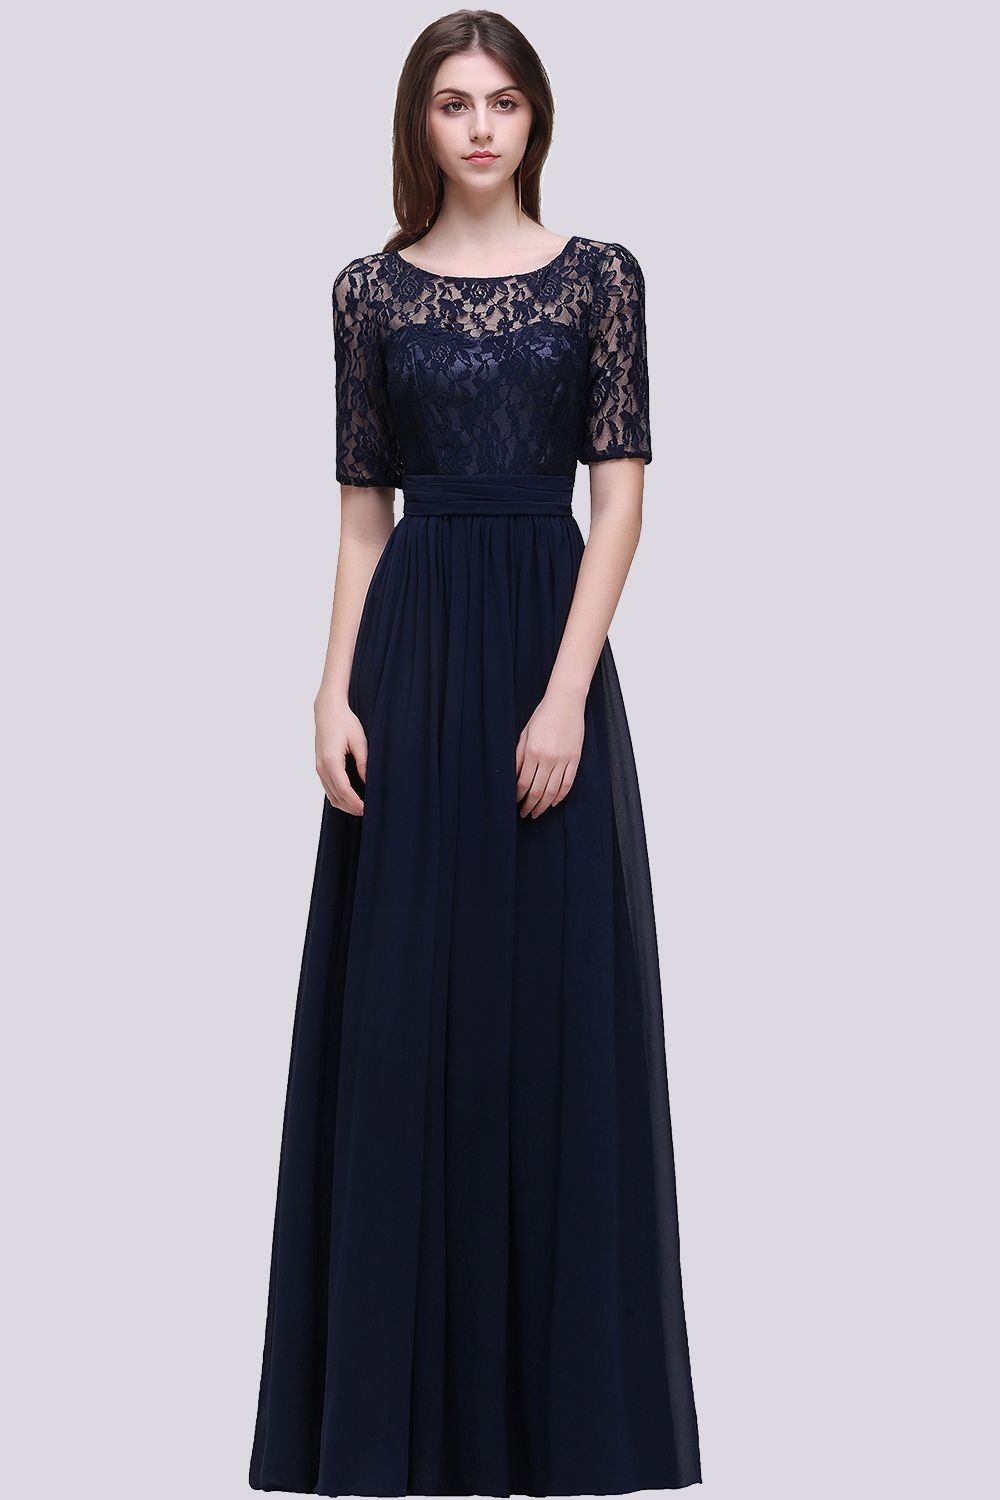 Affordable Lace Scoop Dark Navy Bridesmaid Dresses with Half-Sleeves-27dress